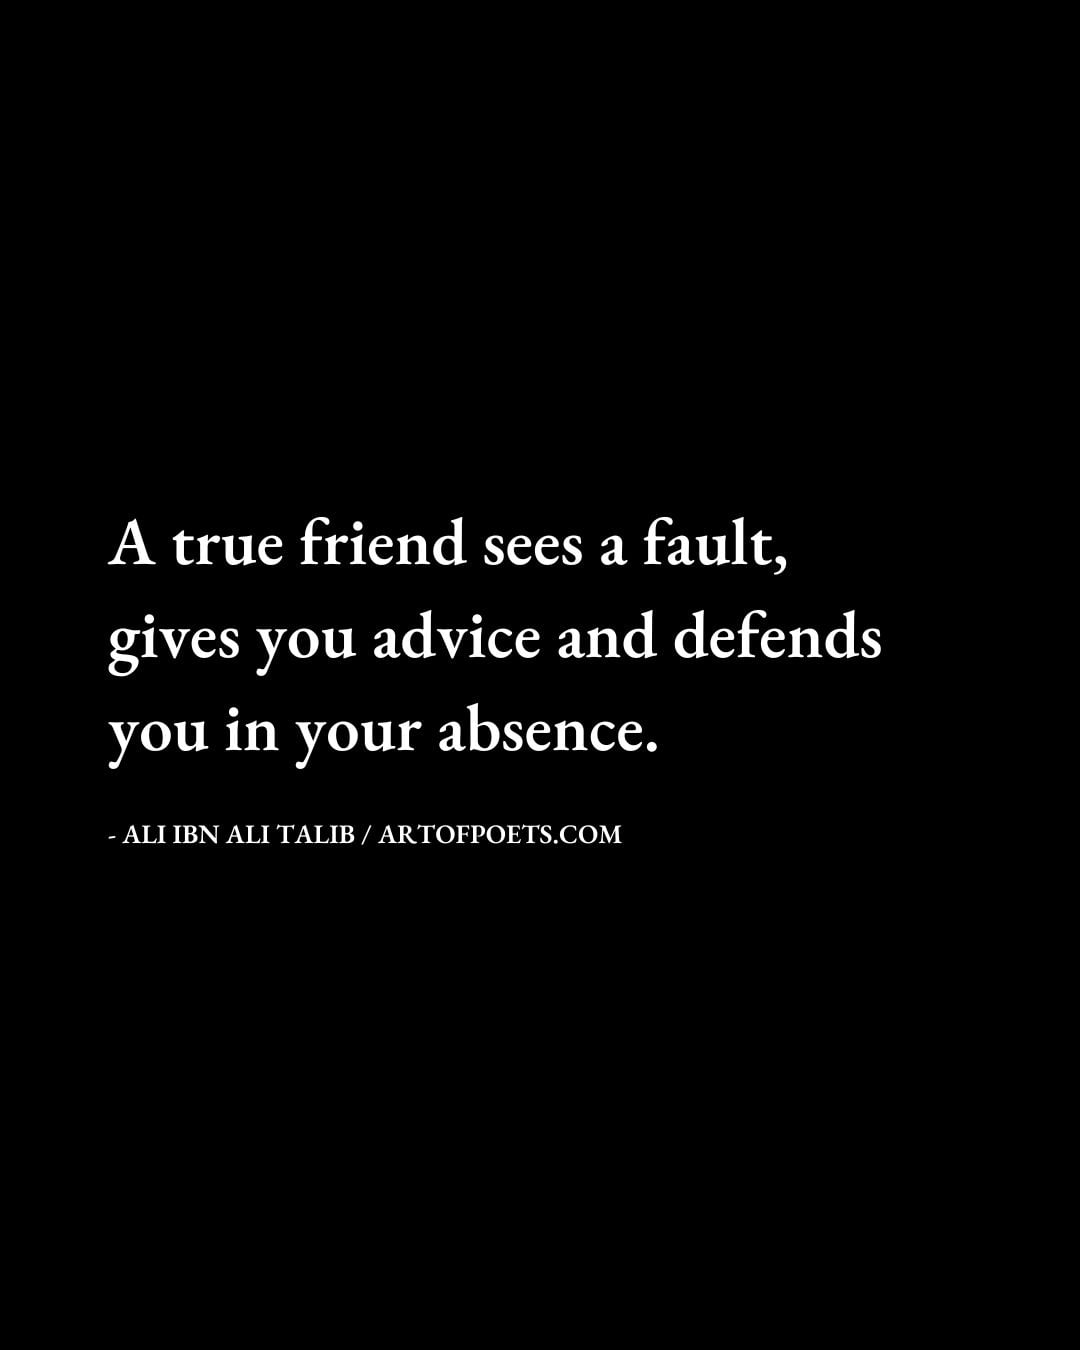 A True friend sees a fault gives you advice and defends you in your absence. Ali ibn Ali Talib